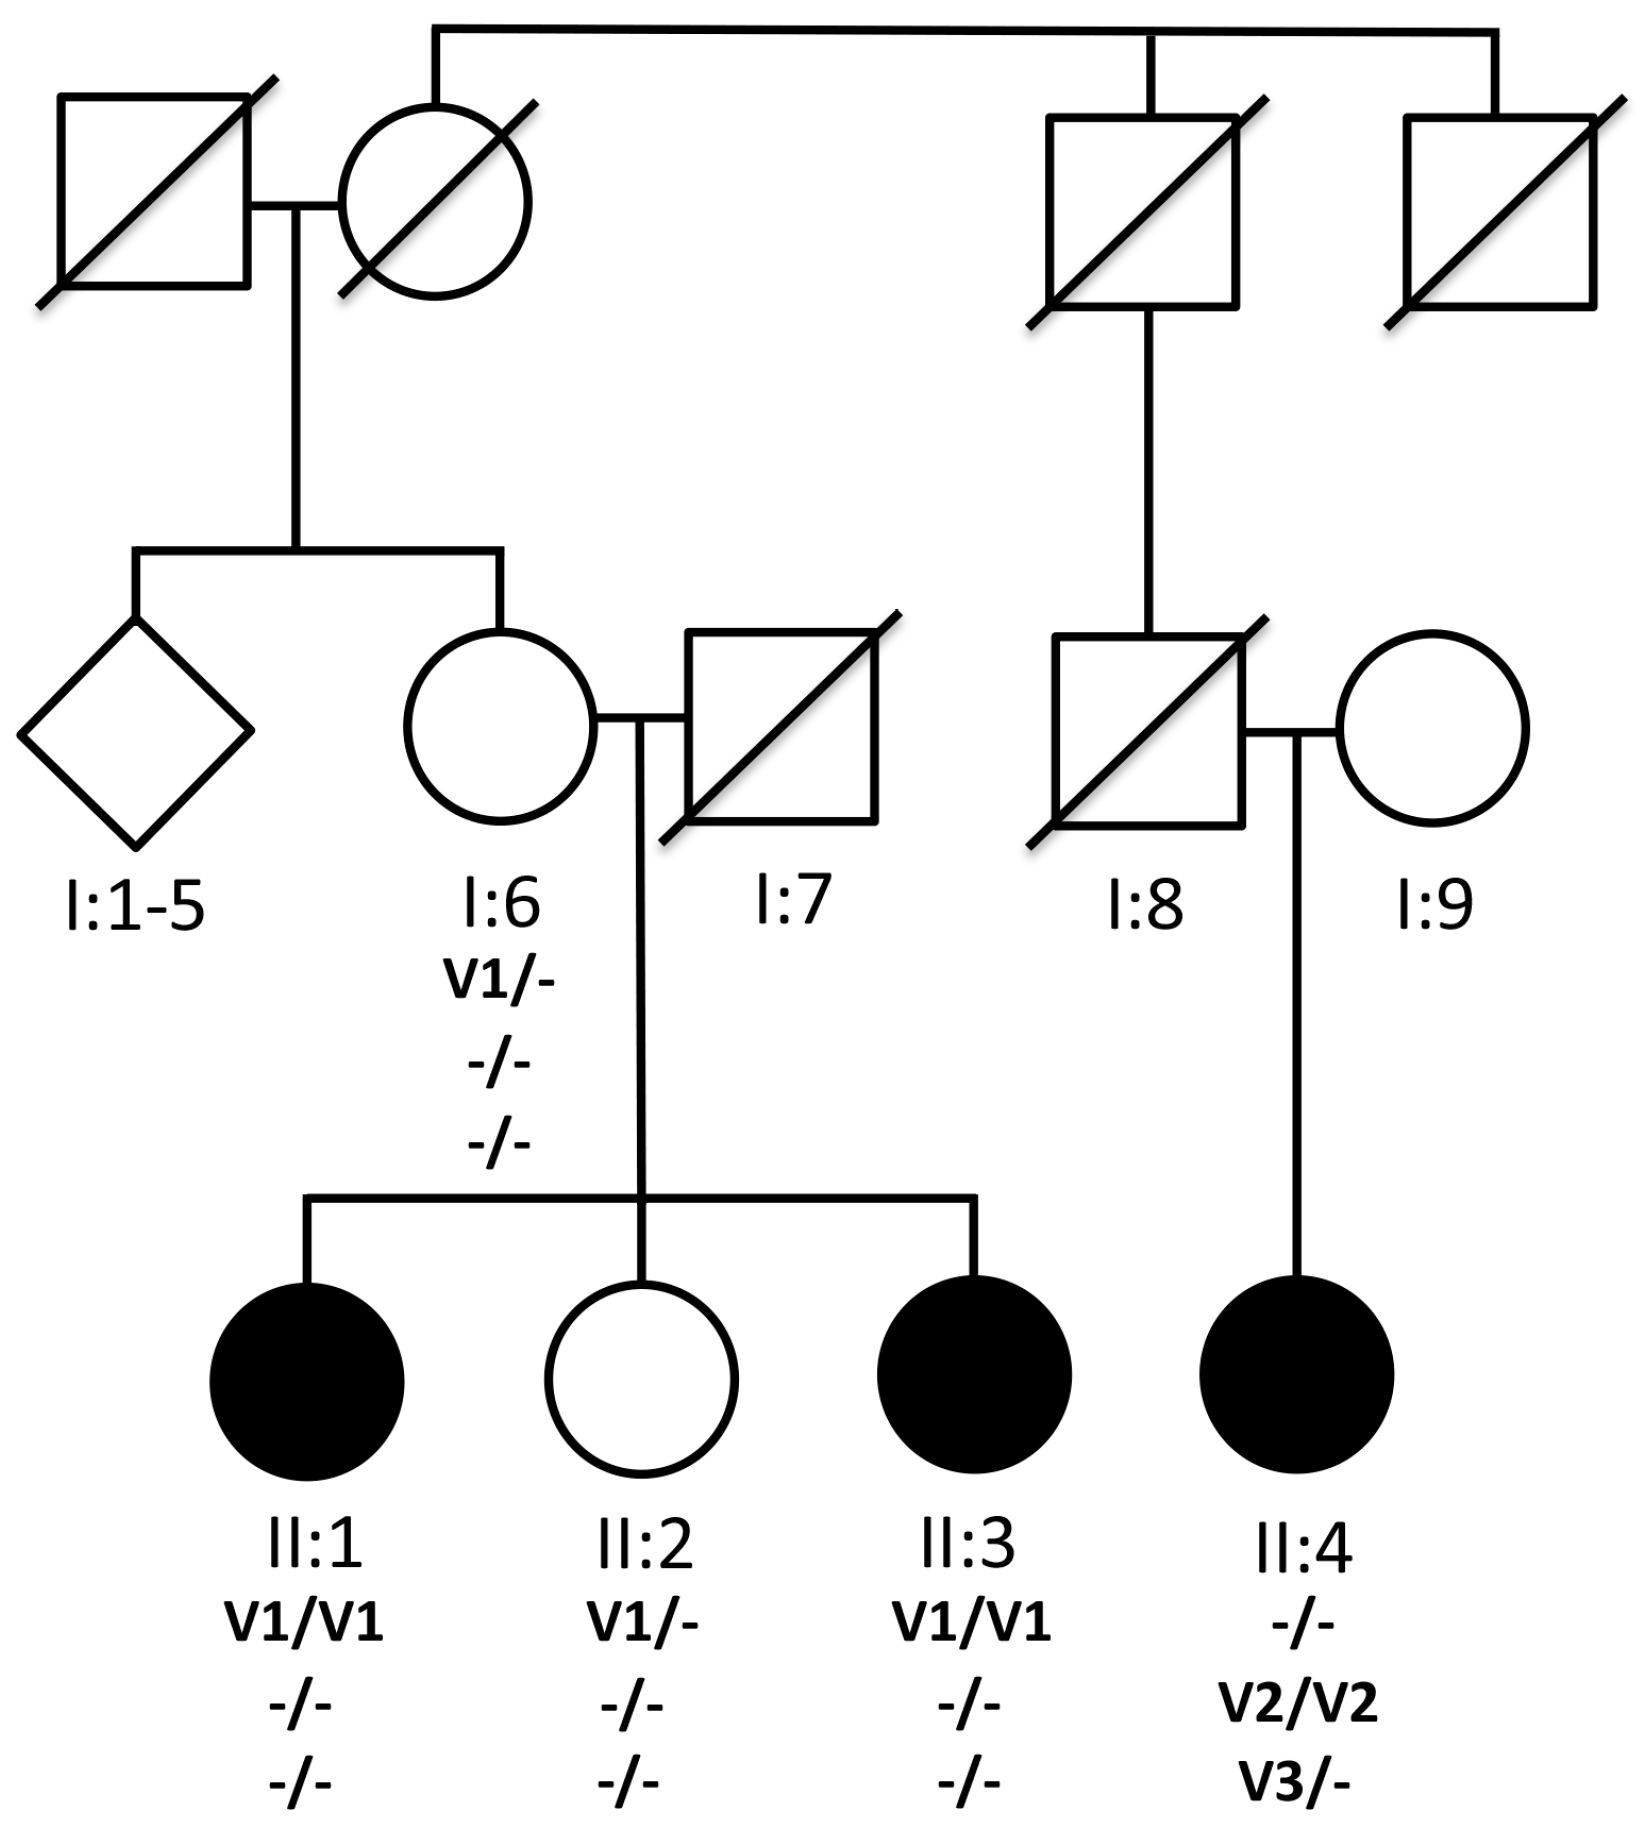 Pedigree and genotypes. All three affected siblings are